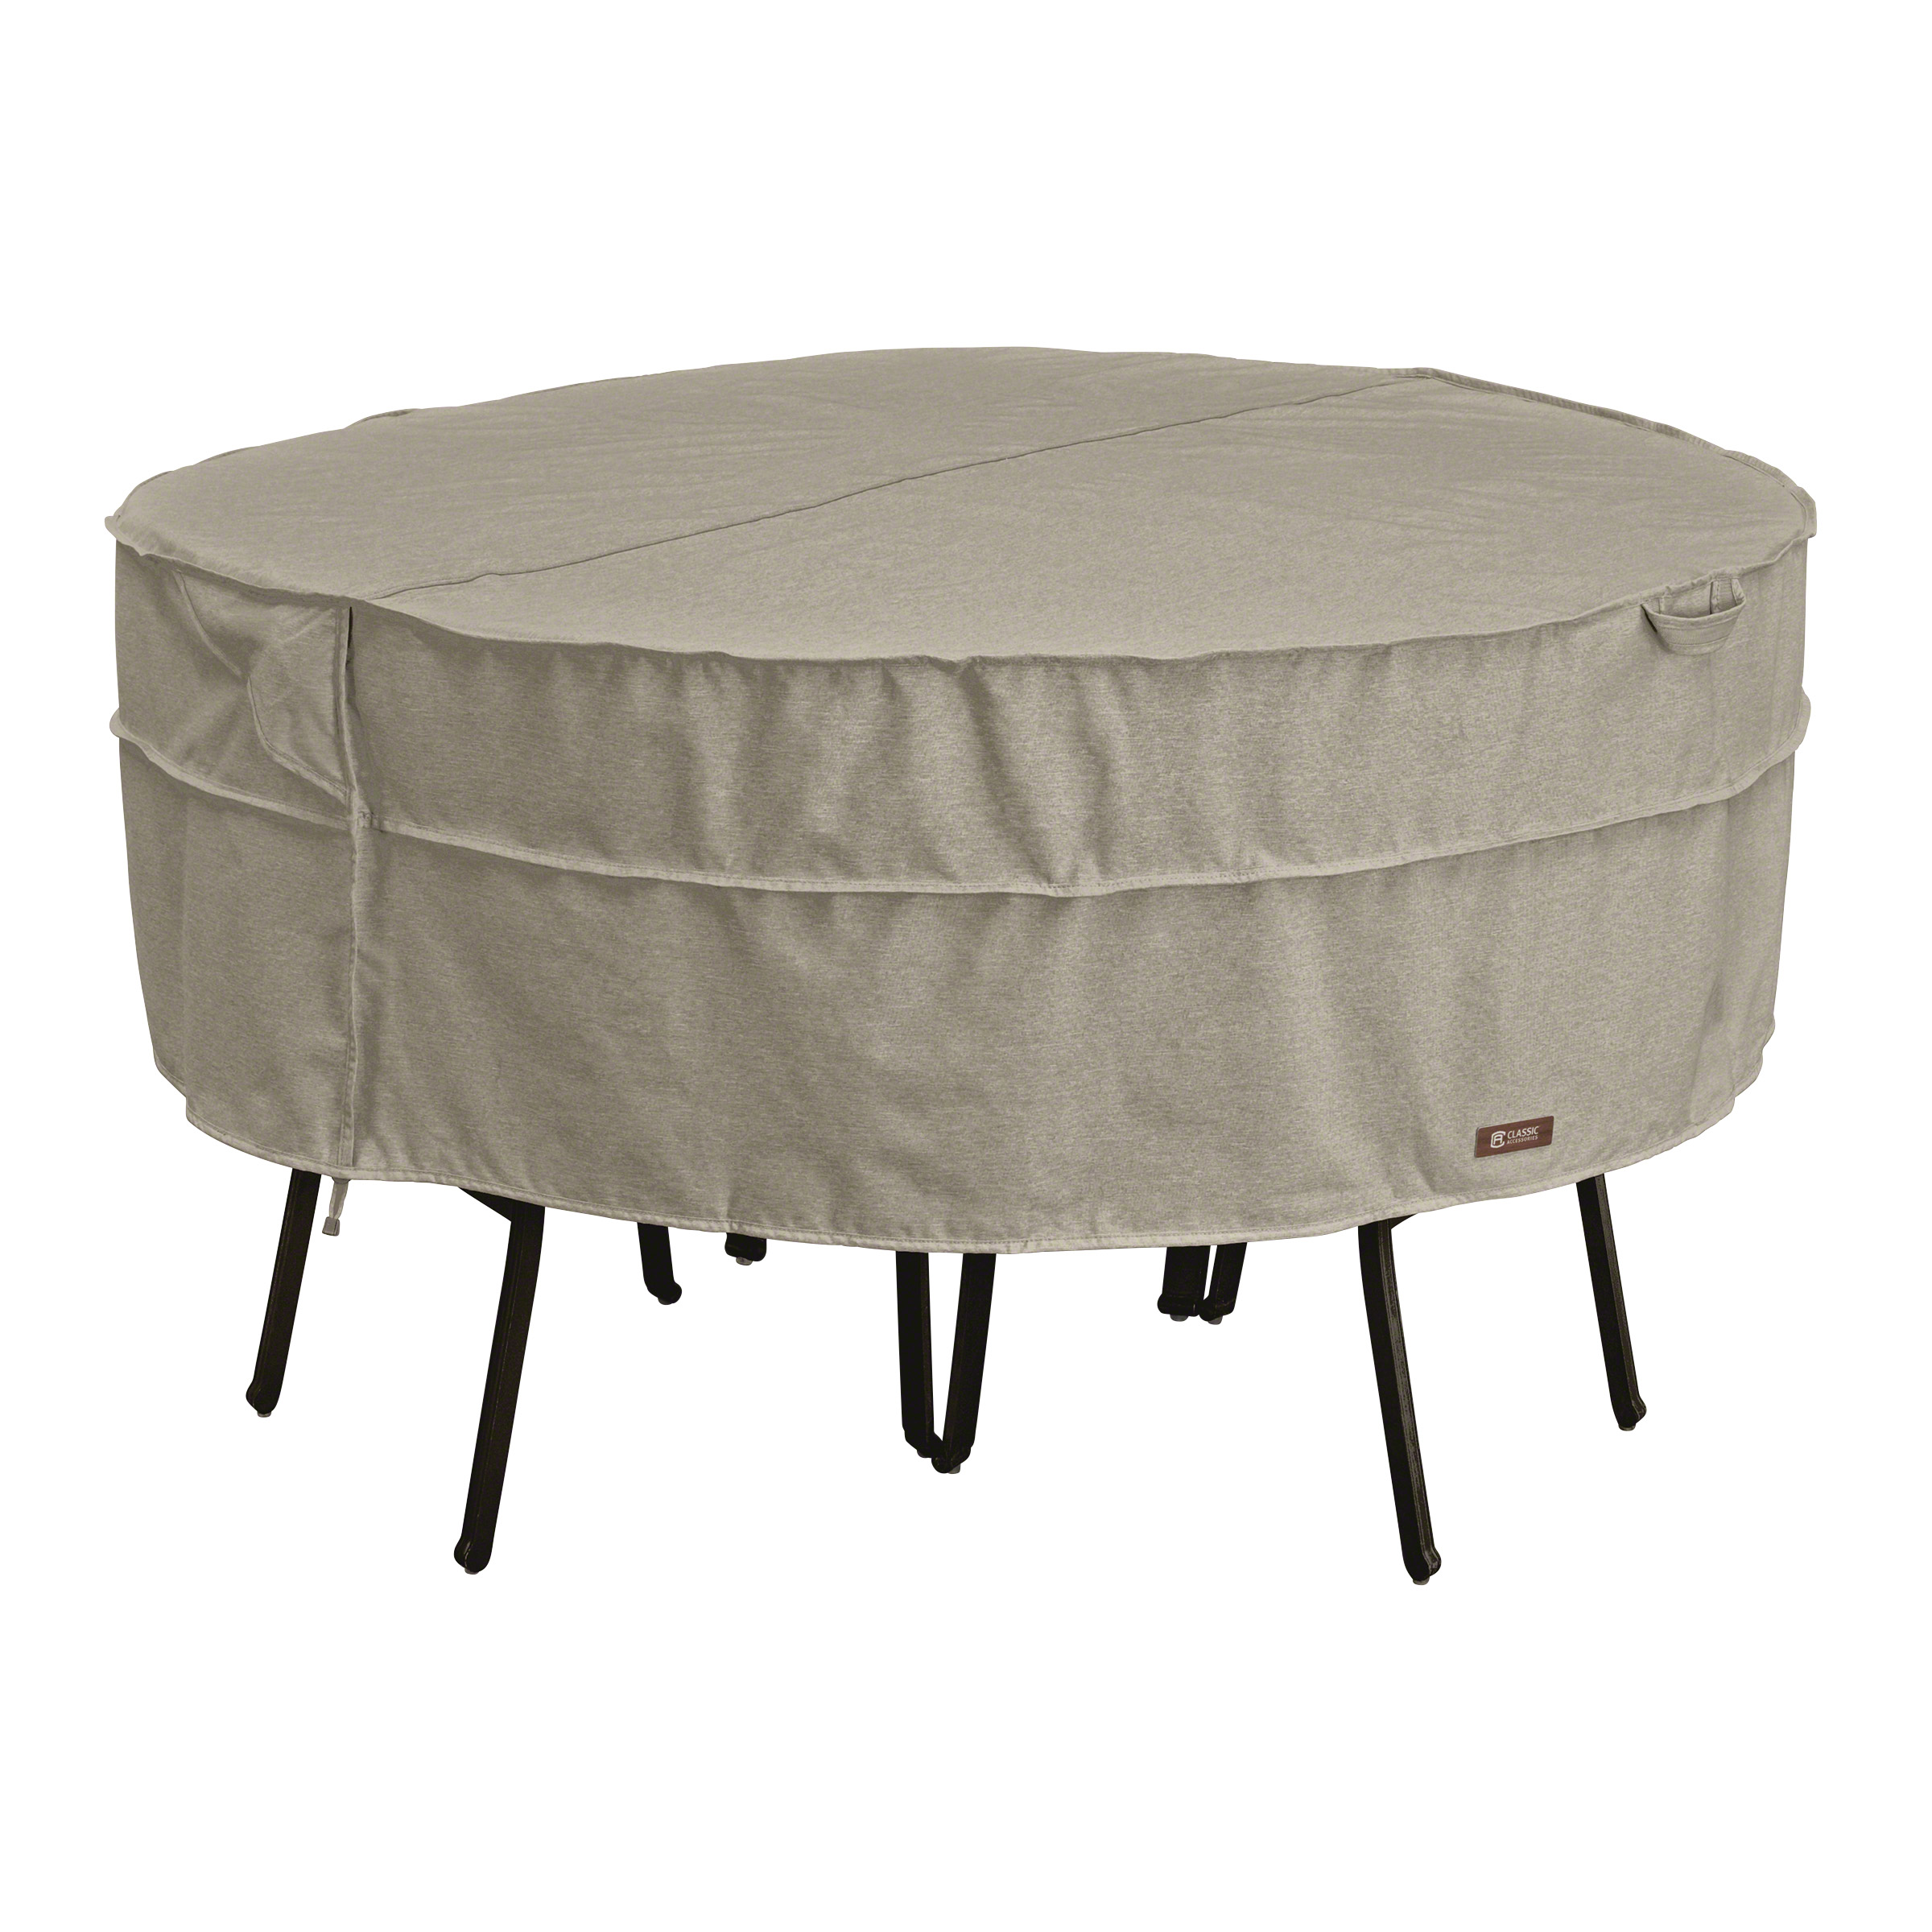 Classic Accessories Montlake Medium Round Patio Table & Chair Set Cover